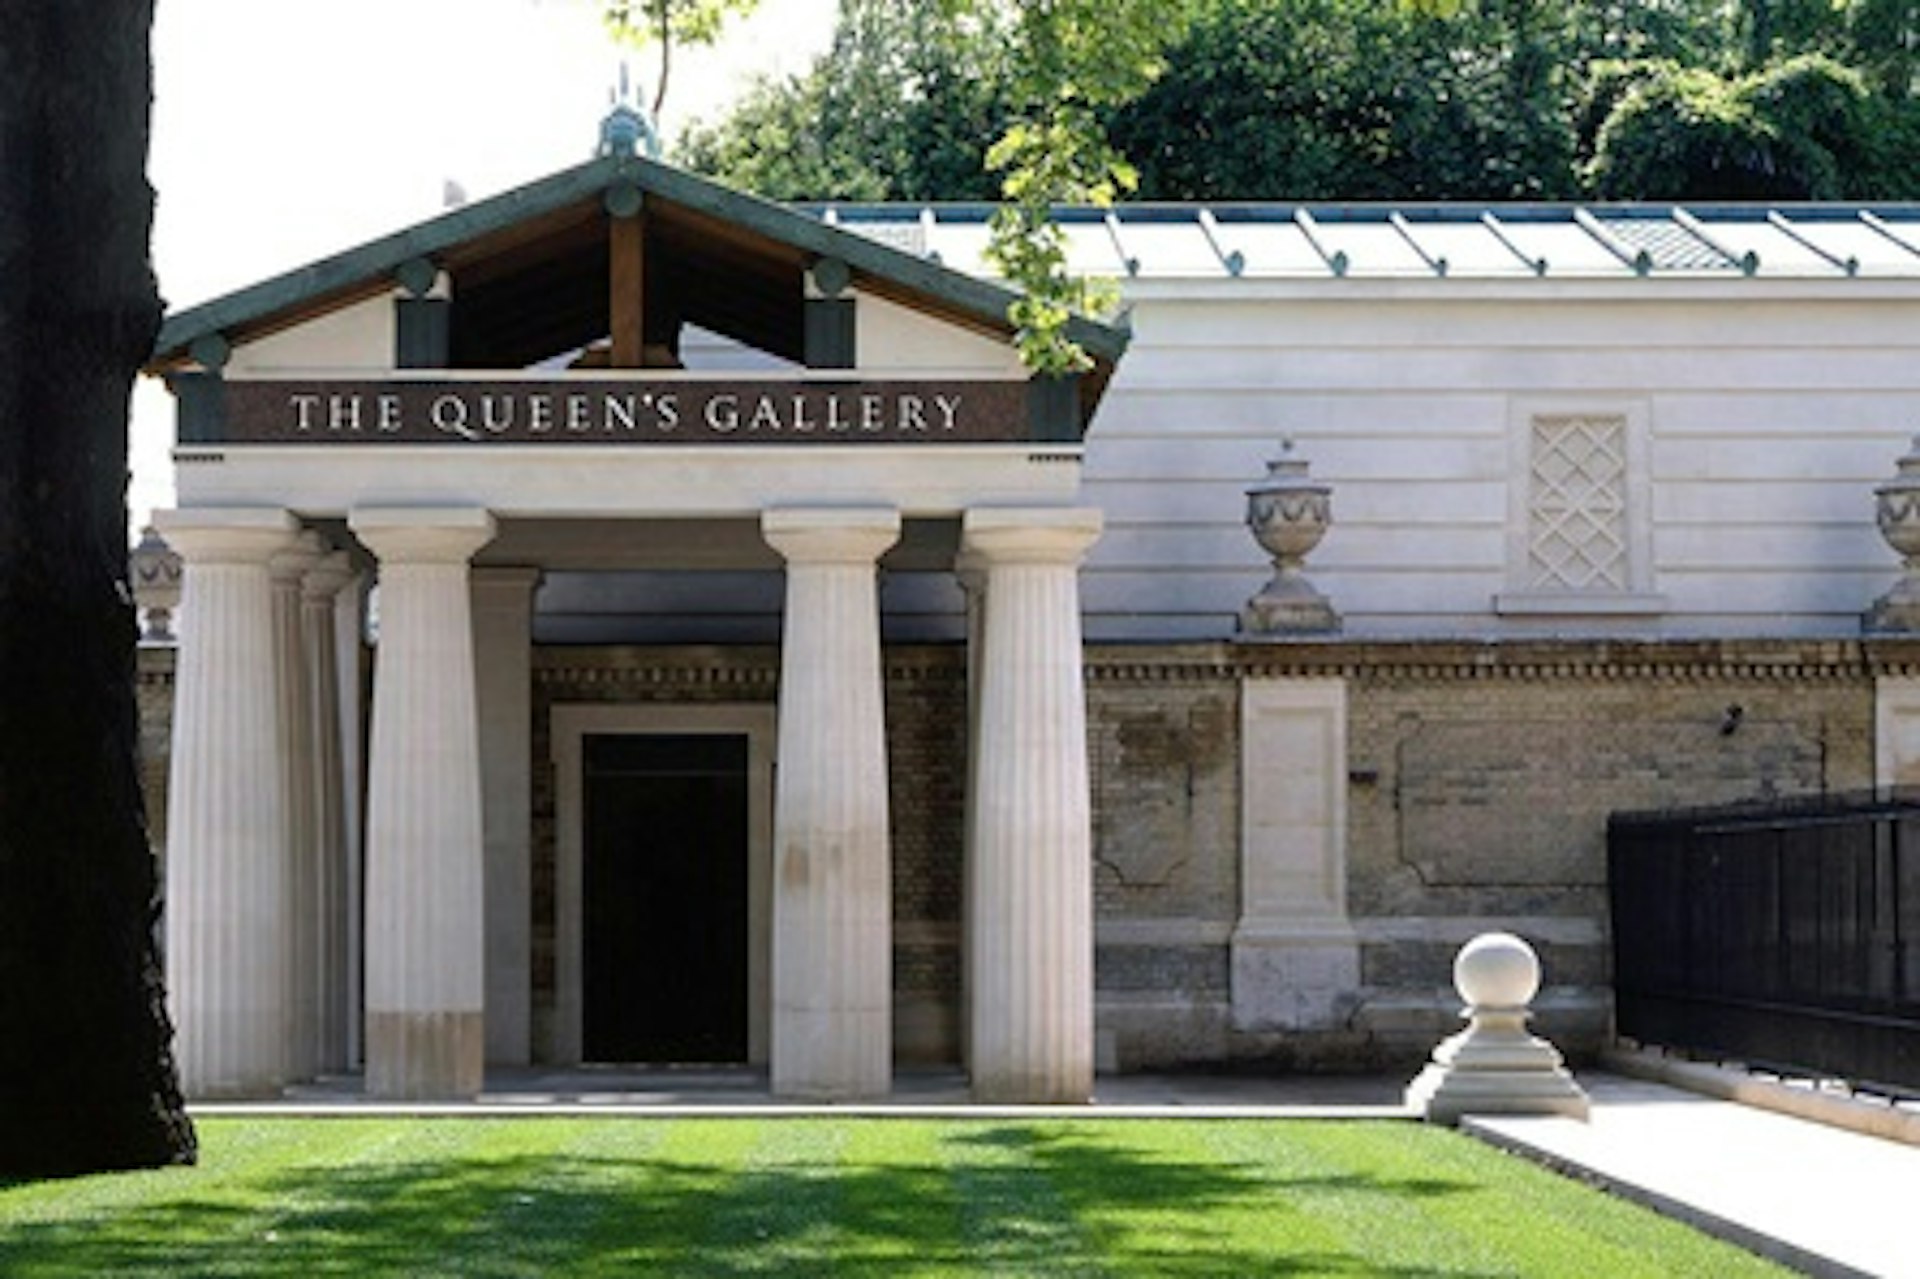 Visit to Queen's Gallery and Royal Afternoon Tea for Two 4